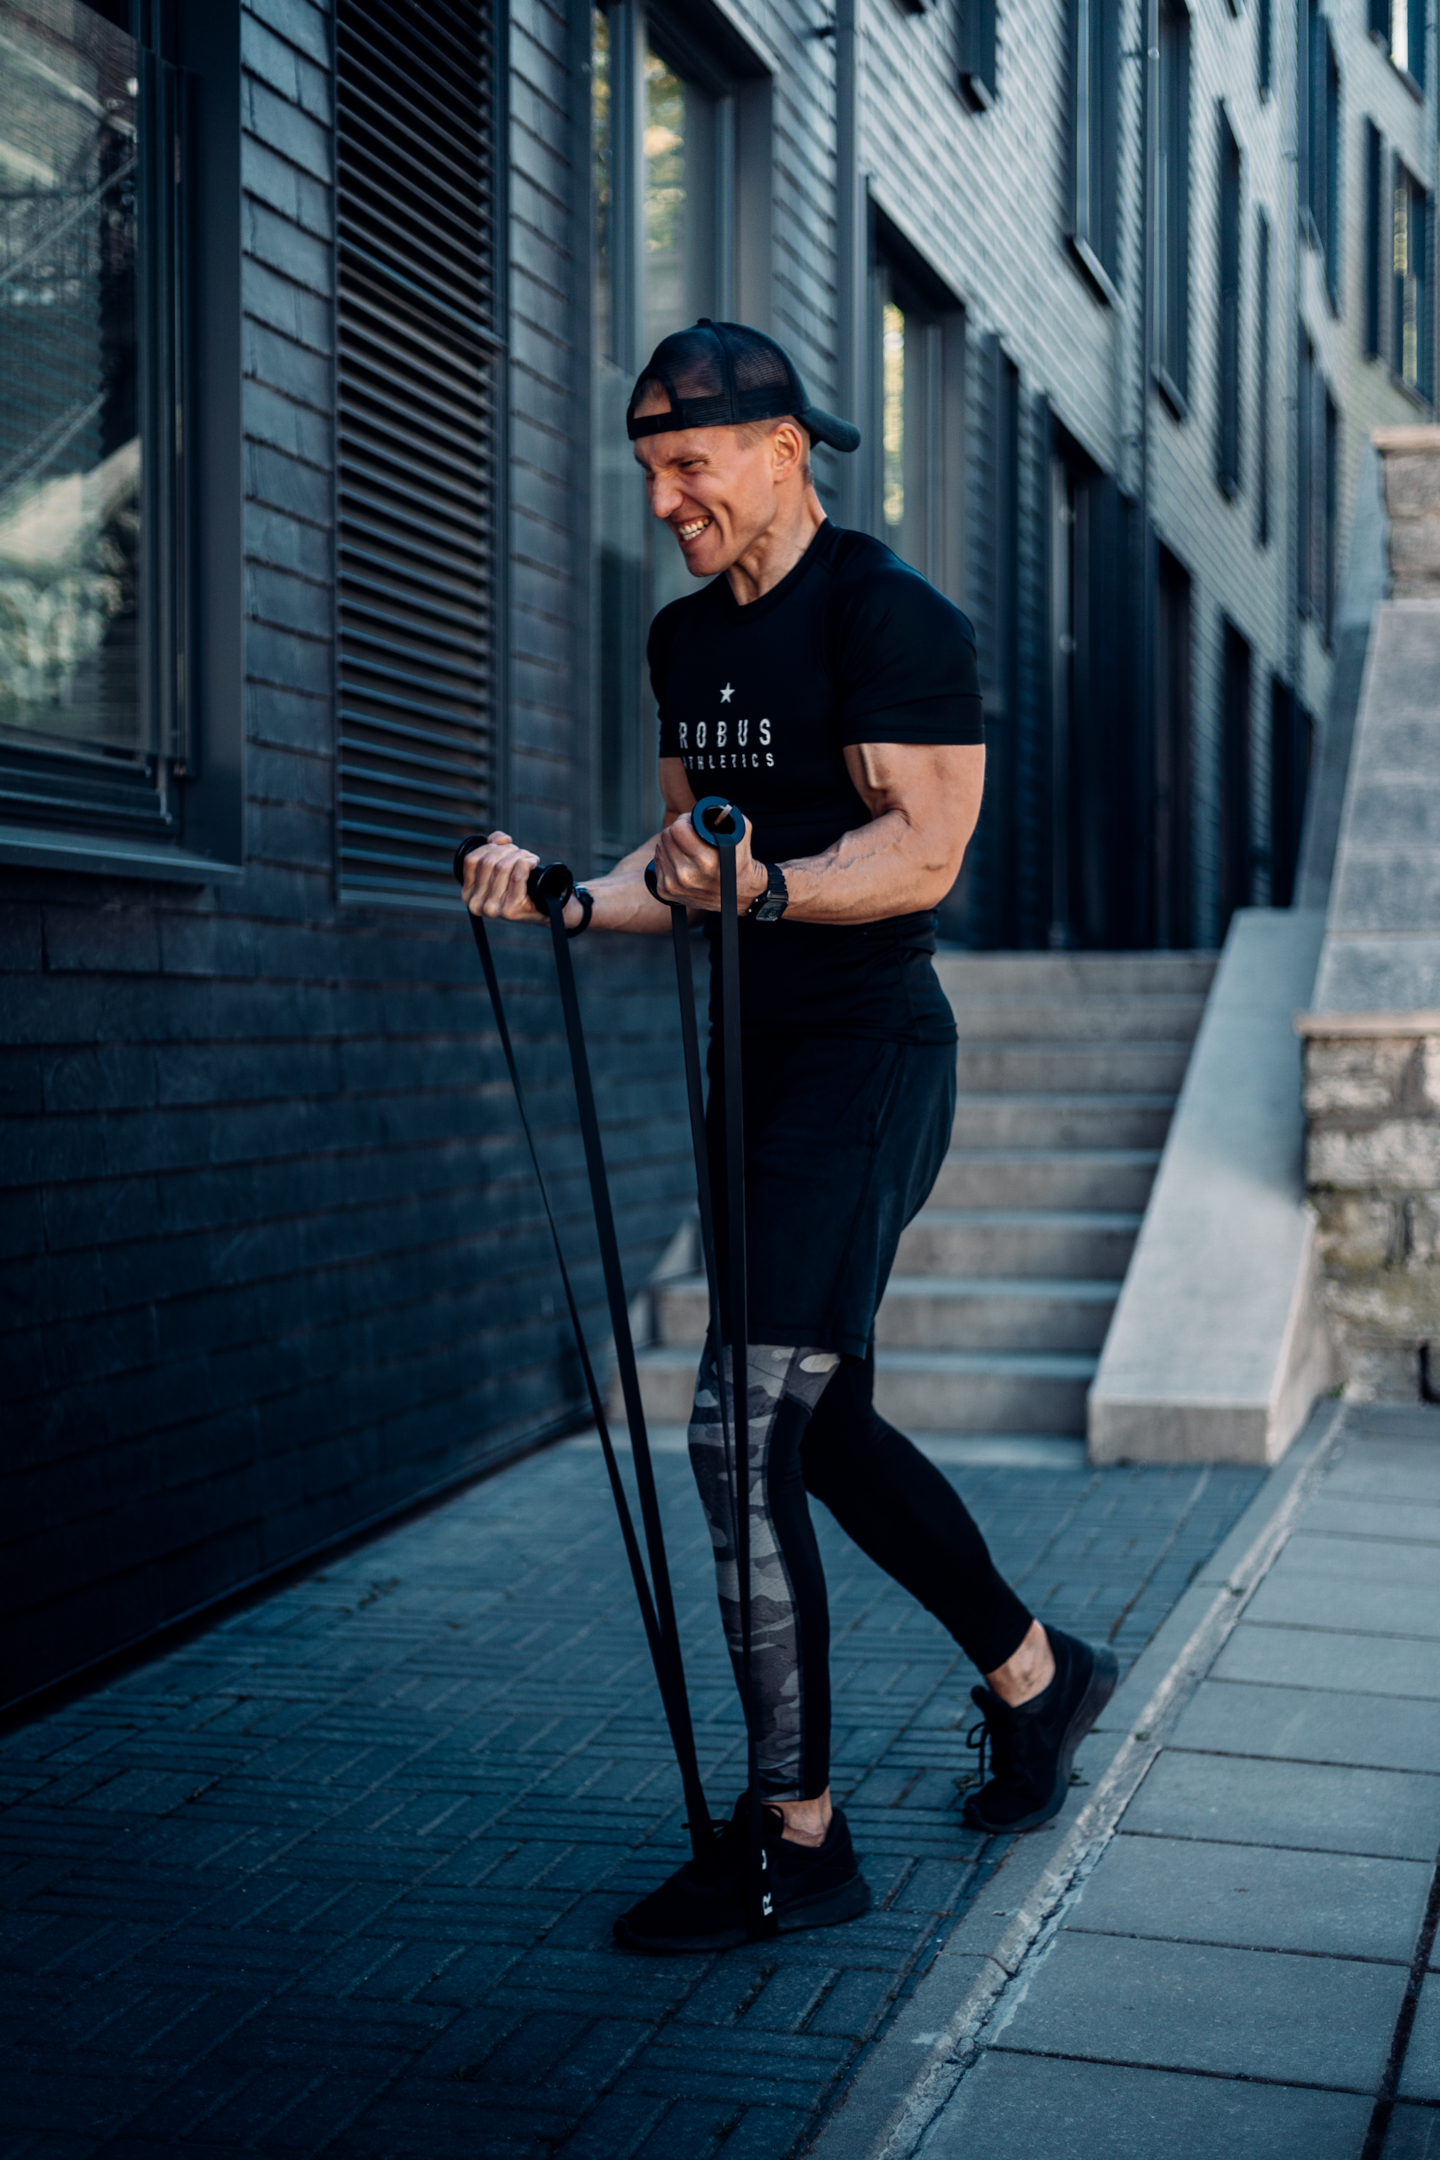 TOP 5 Home Workout equipment. With up to 152 kg of counter resistance, the Robus Athletics GymBars are not only for bicep curls, but also suitable for key exercises like deadlifts and squats.